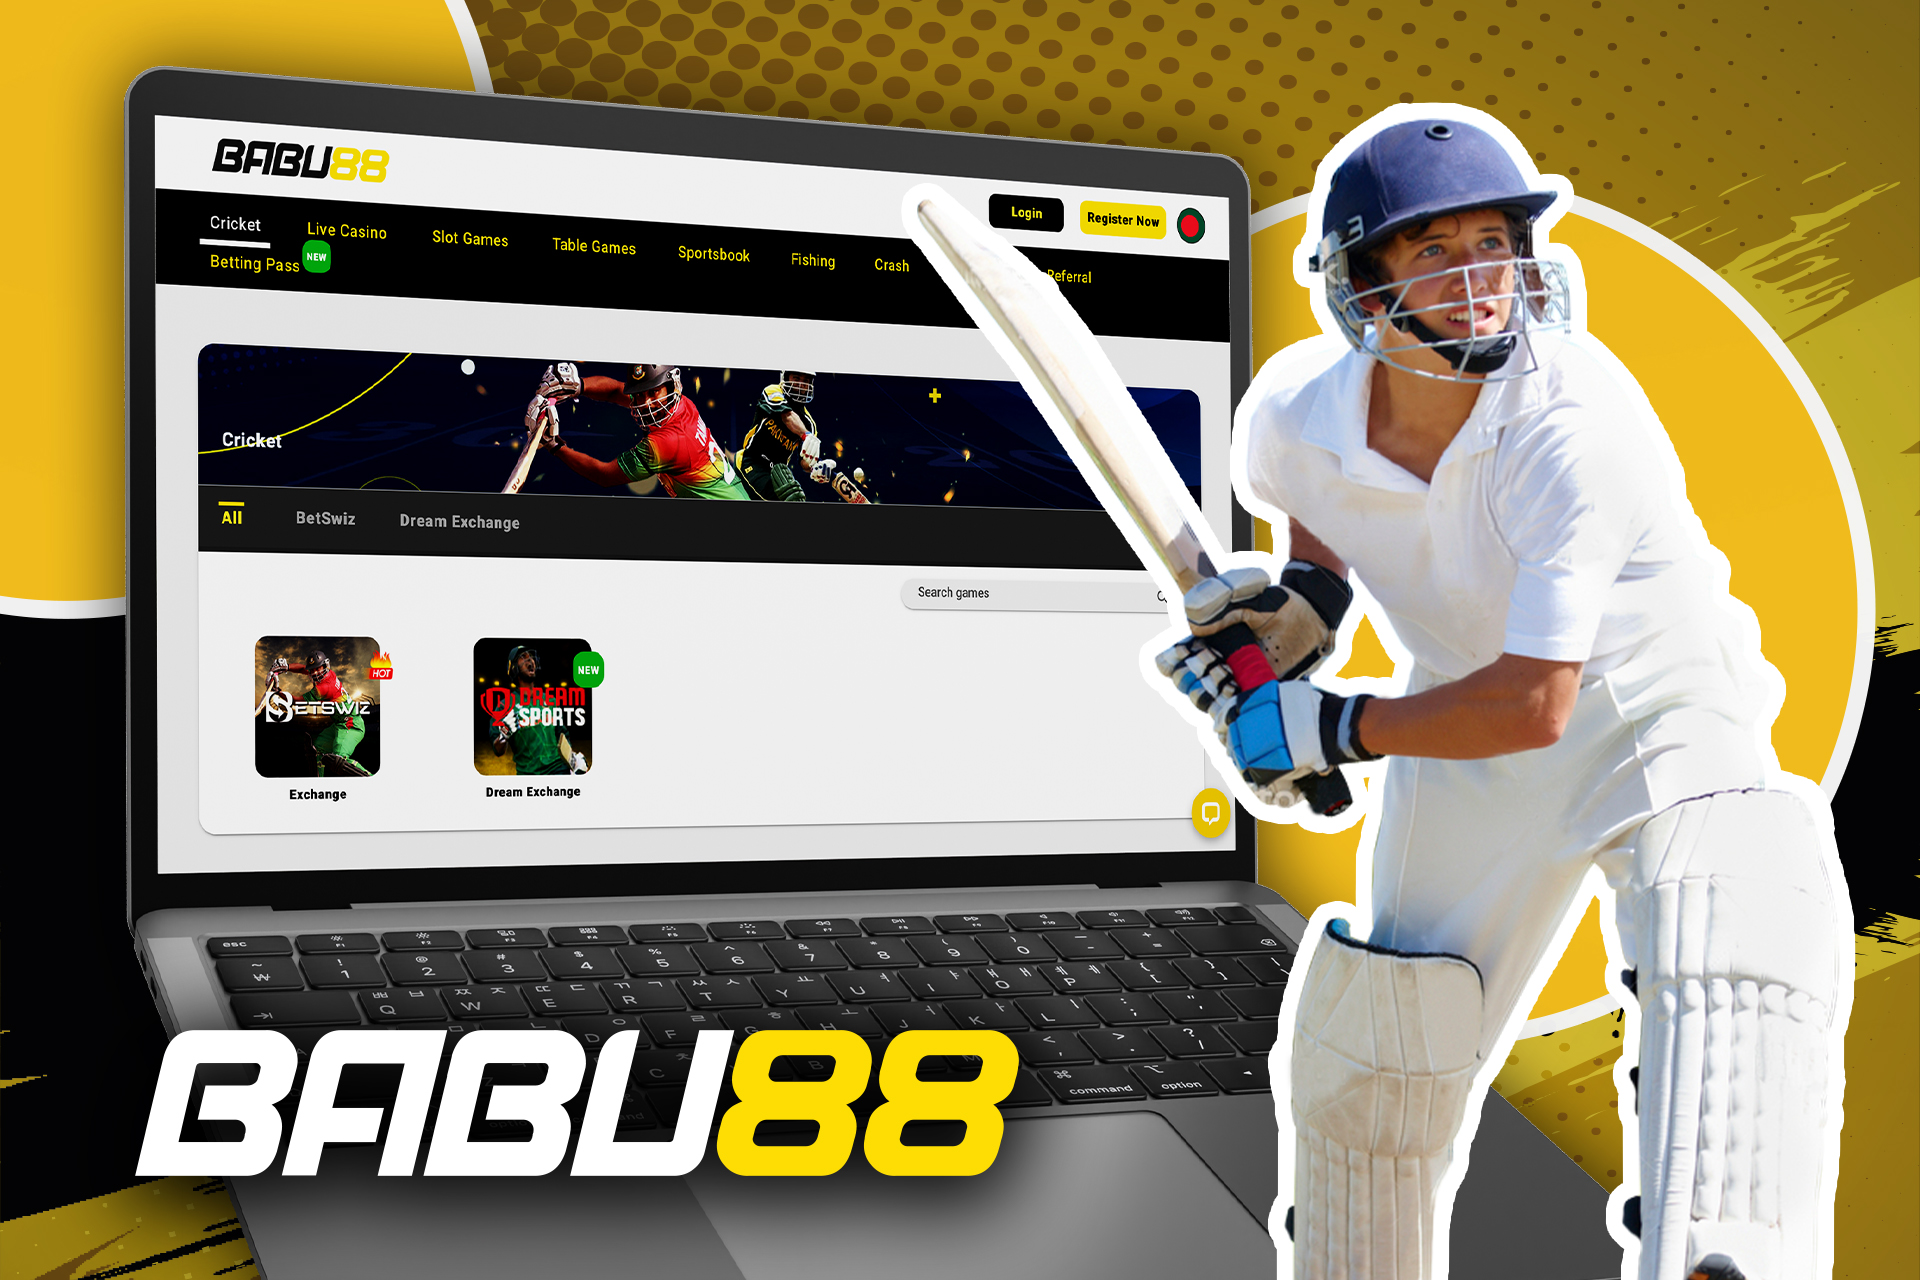 Sign up for Babu88, top up your account and start betting on cricket on the sportsbook.